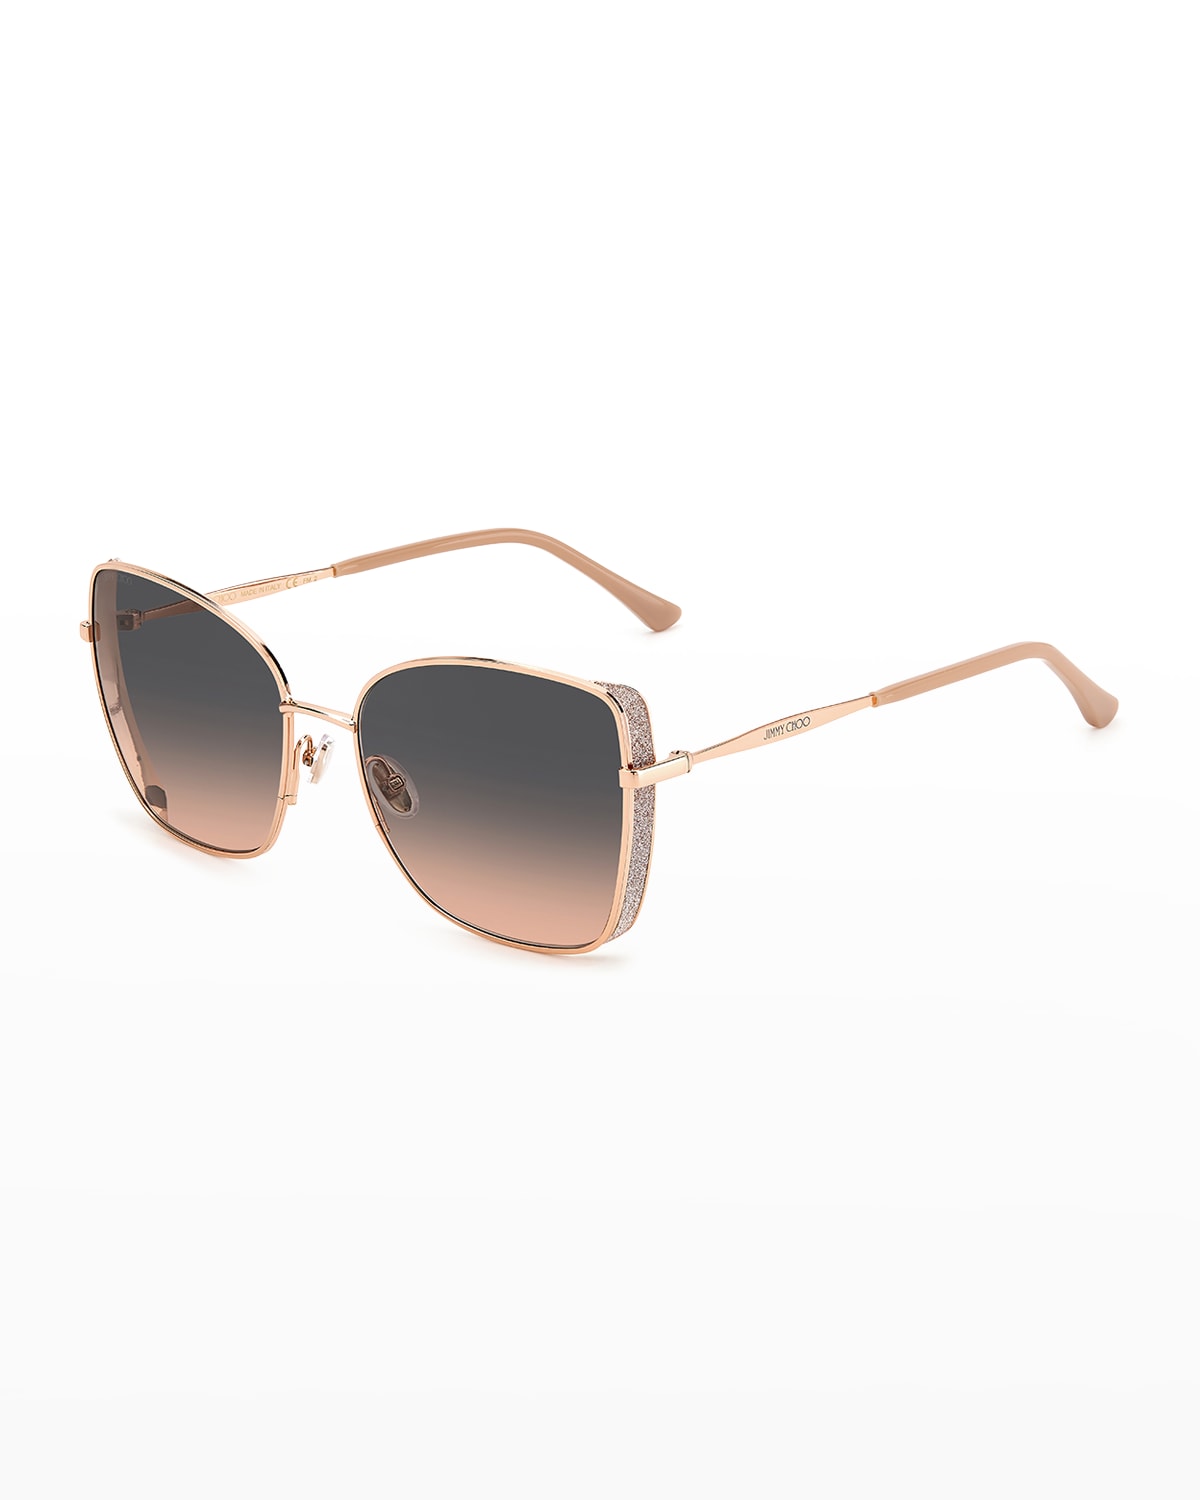 Jimmy Choo Alexis Stainless Steel Butterfly Sunglasses